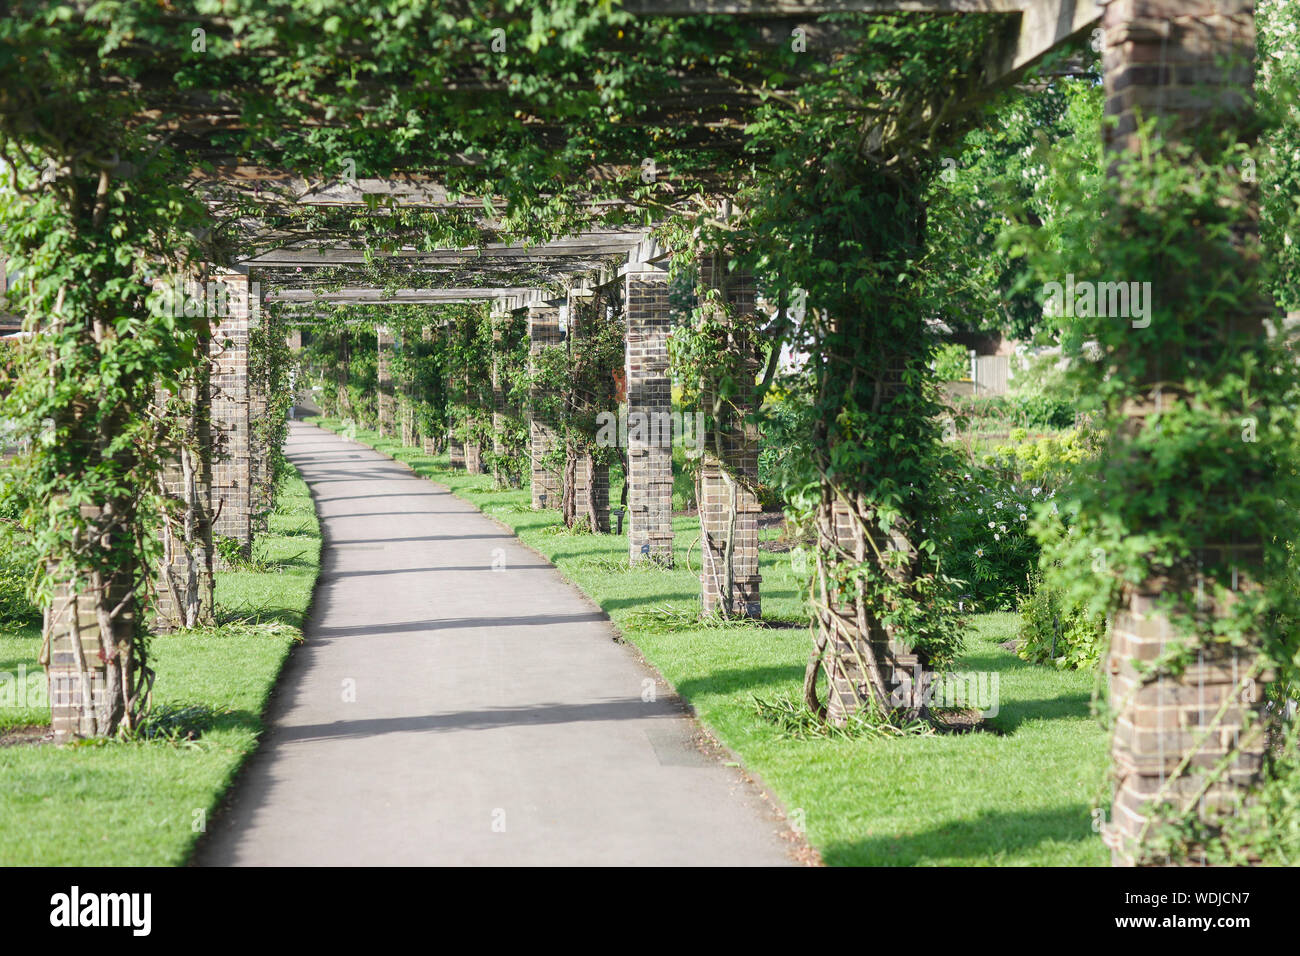 Path In A Botanical Garden With Special Pillars And Beams For